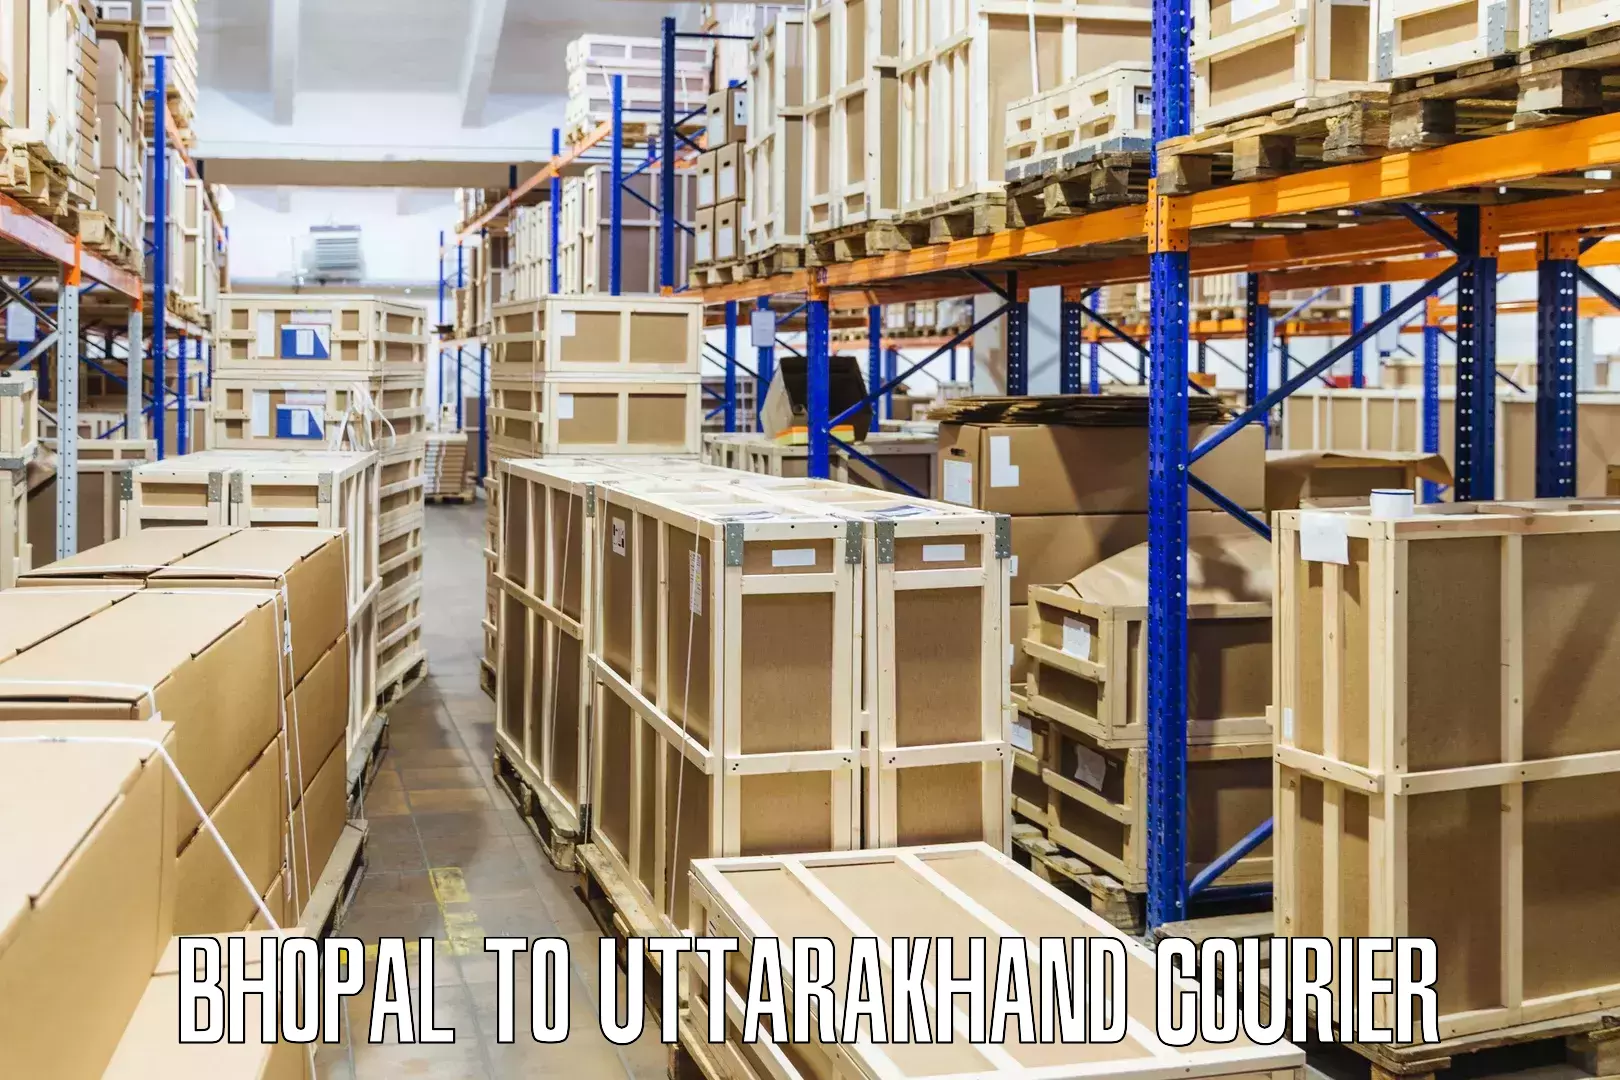 Parcel handling and care Bhopal to Ranikhet